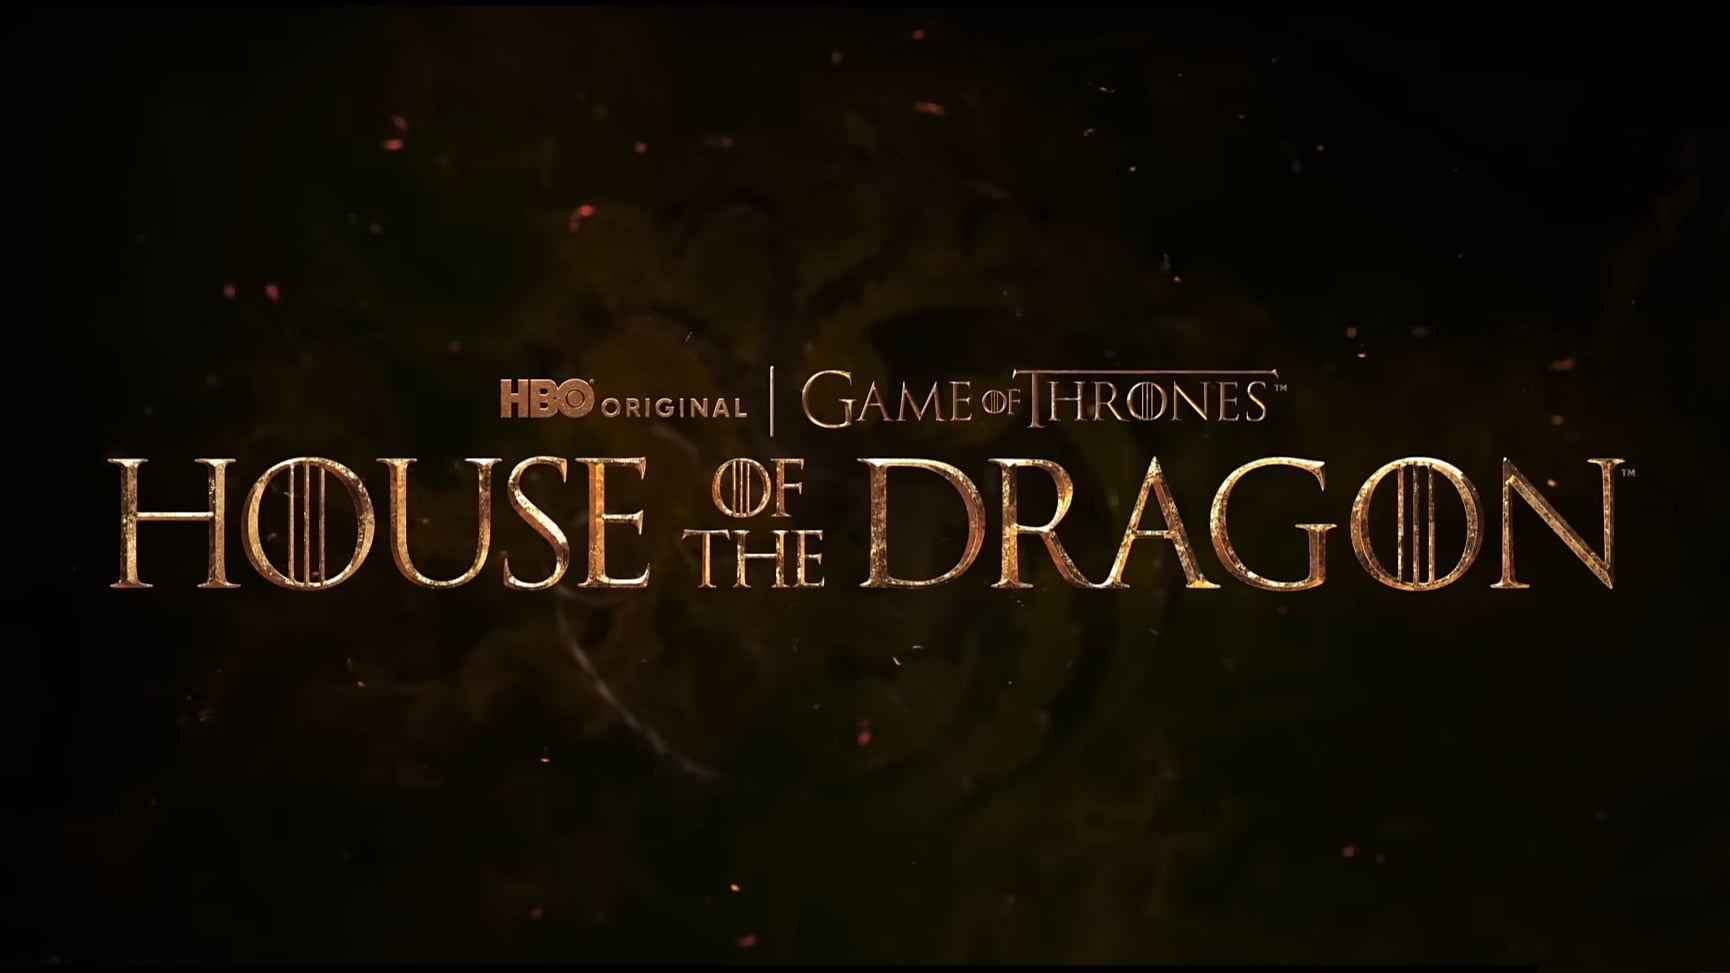 Exclusive Preview of 'House of the Dragon' Season 2